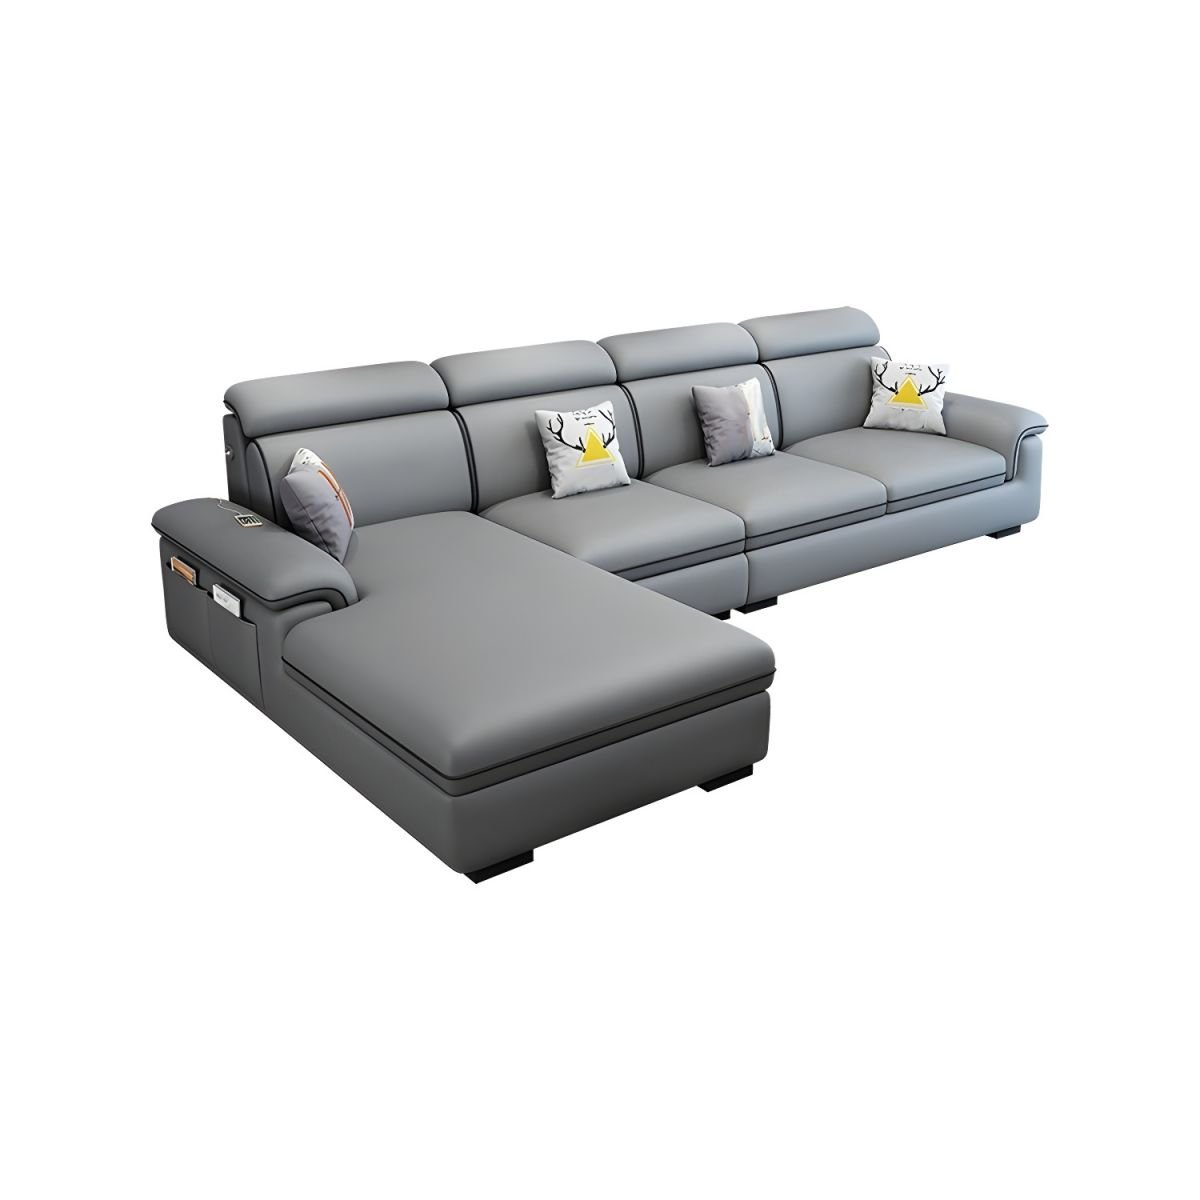 Wooden Modern 9 Feet L-Shape Sectionals No Distressing Seats 4 Storage Included Sofa Chaise - Tech Cloth Grey Left